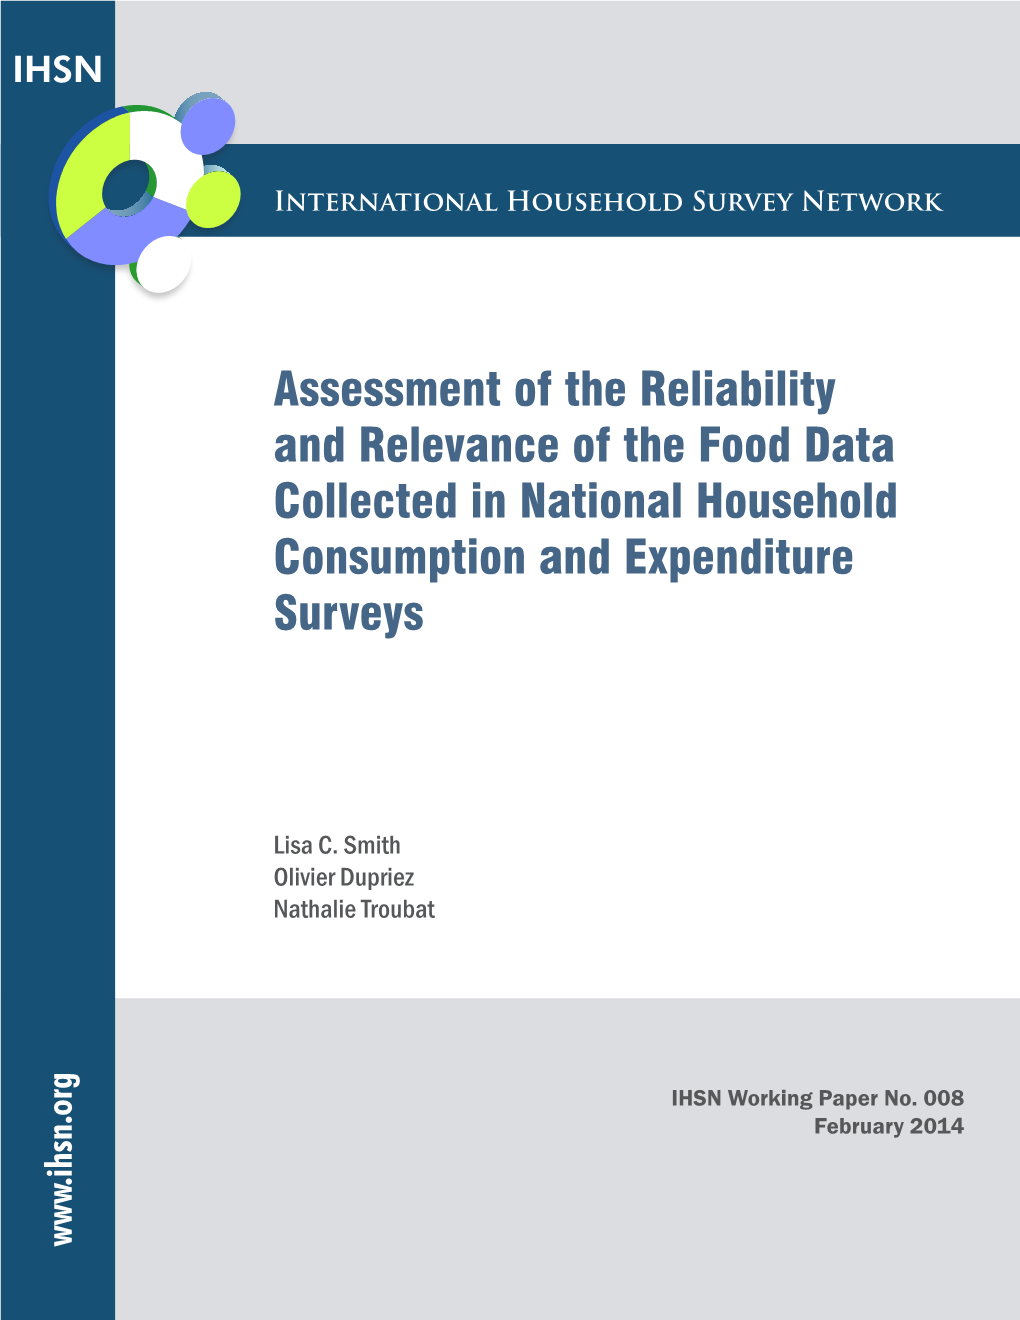 Assessment of the Reliability and Relevance of the Food Data Collected in National Household Consumption and Expenditure Surveys